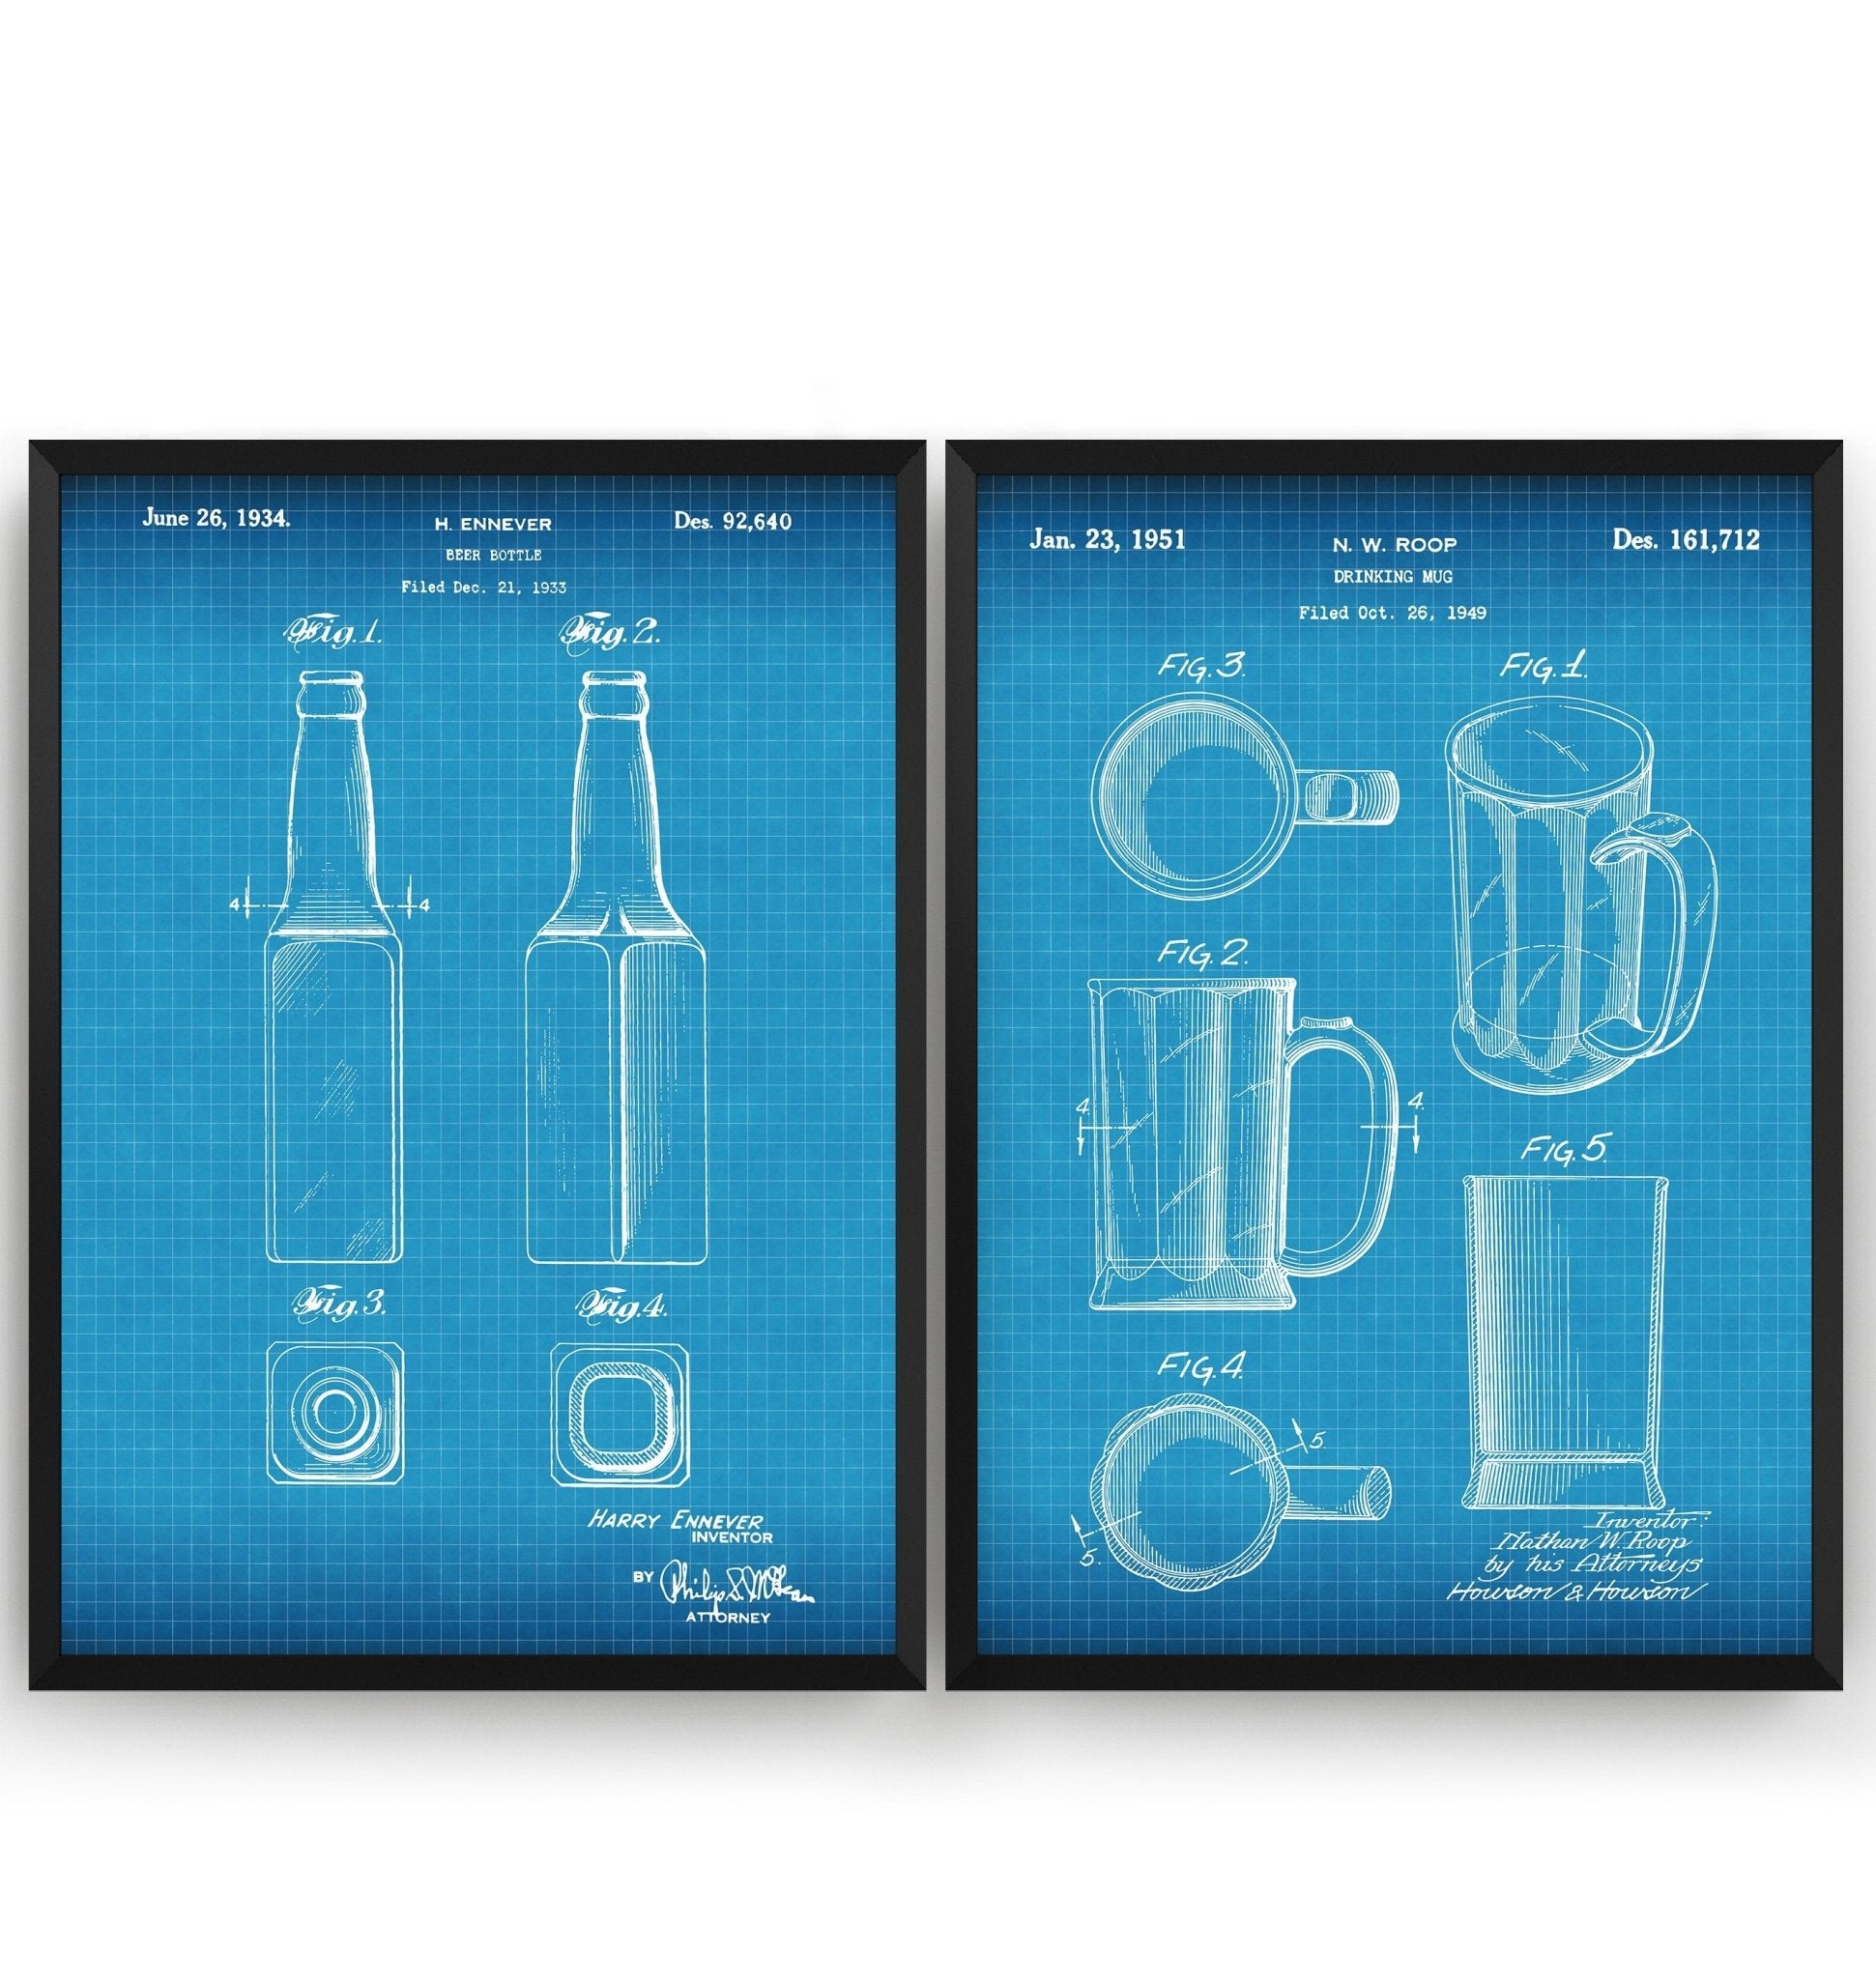 Beer Mug And Bottle Set Of 2 Patent Prints - Magic Posters